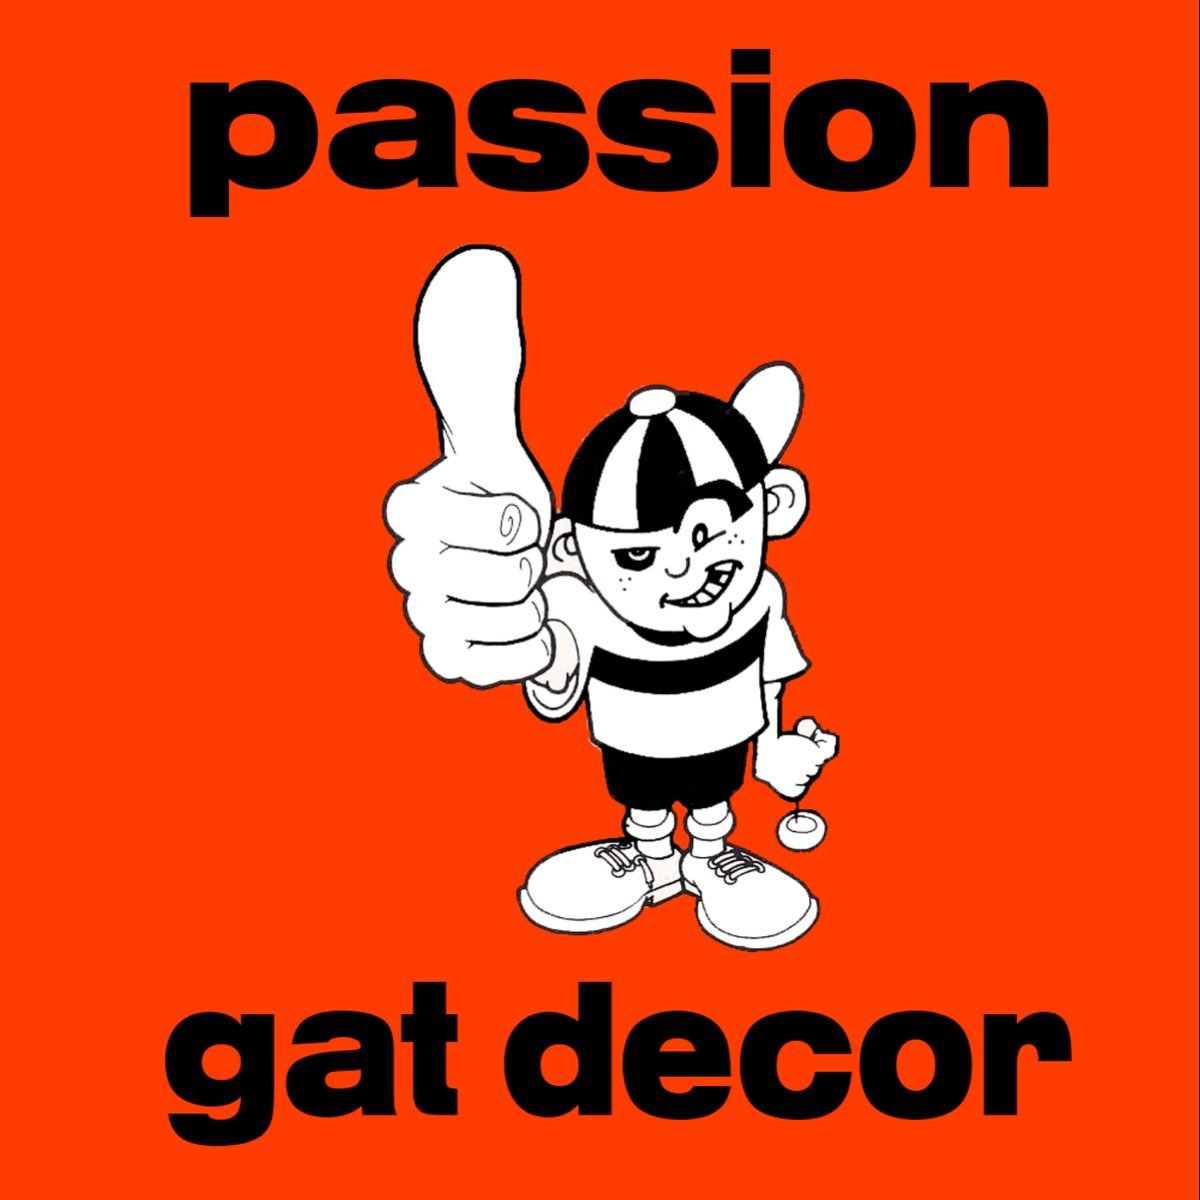 1. Passion by Gat Decor, 1992